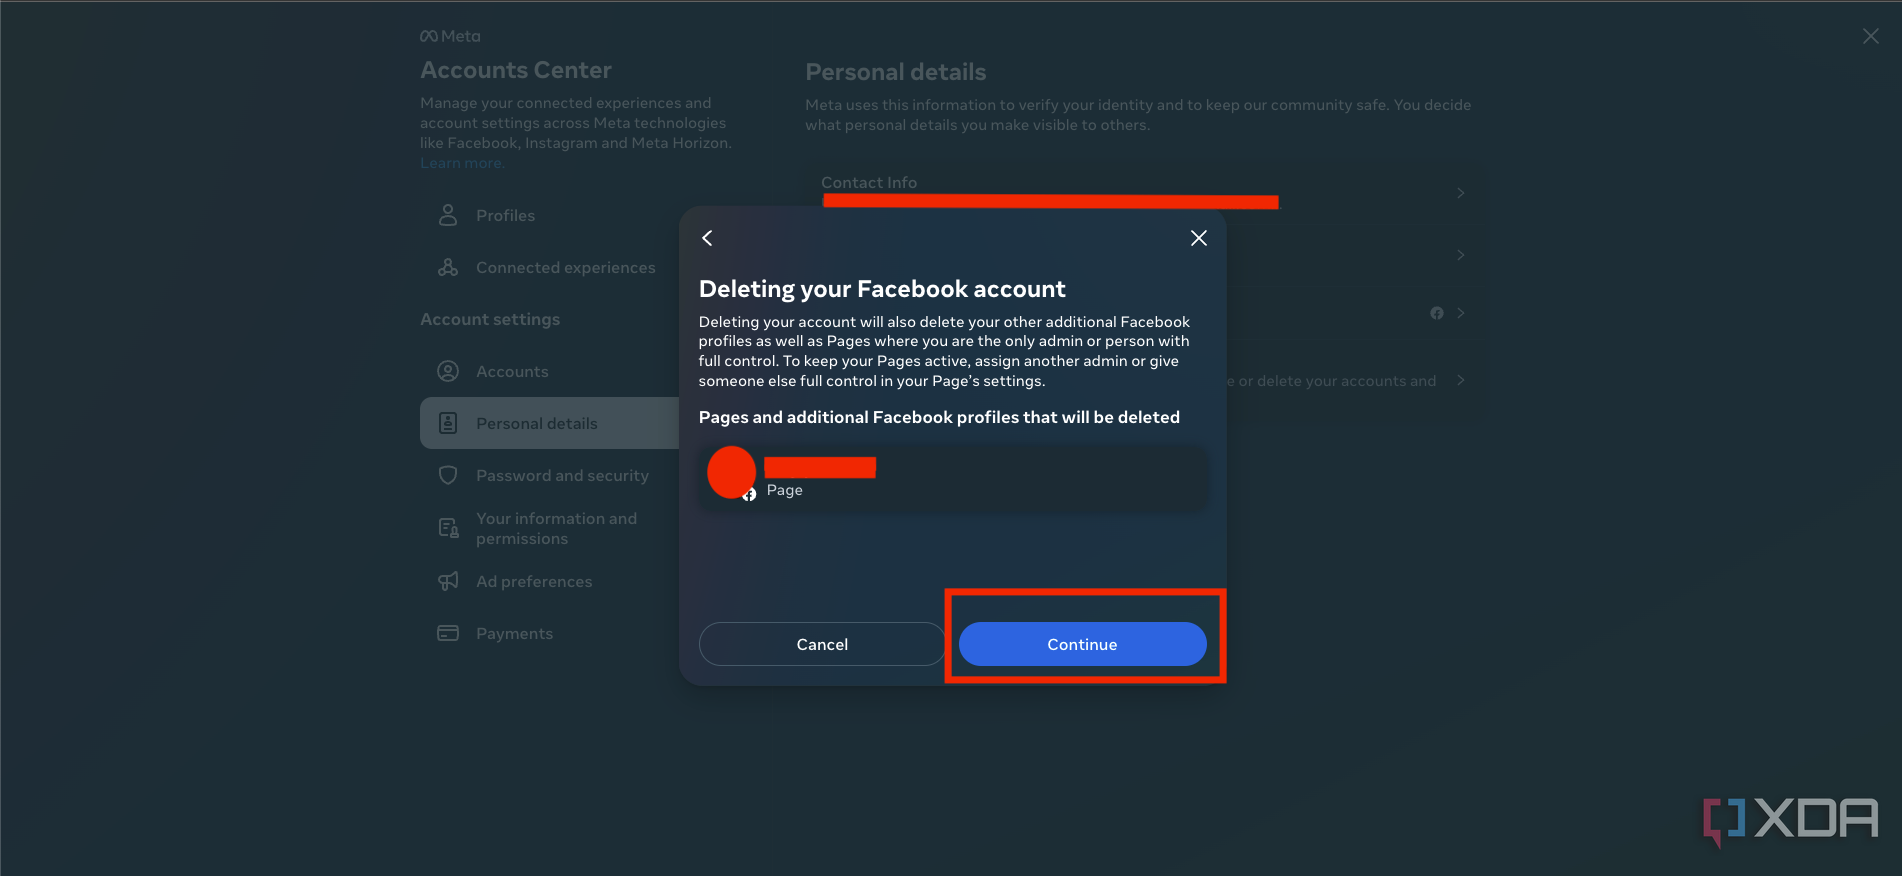 A screenshot showing the final confirmation to delete account in facebook.